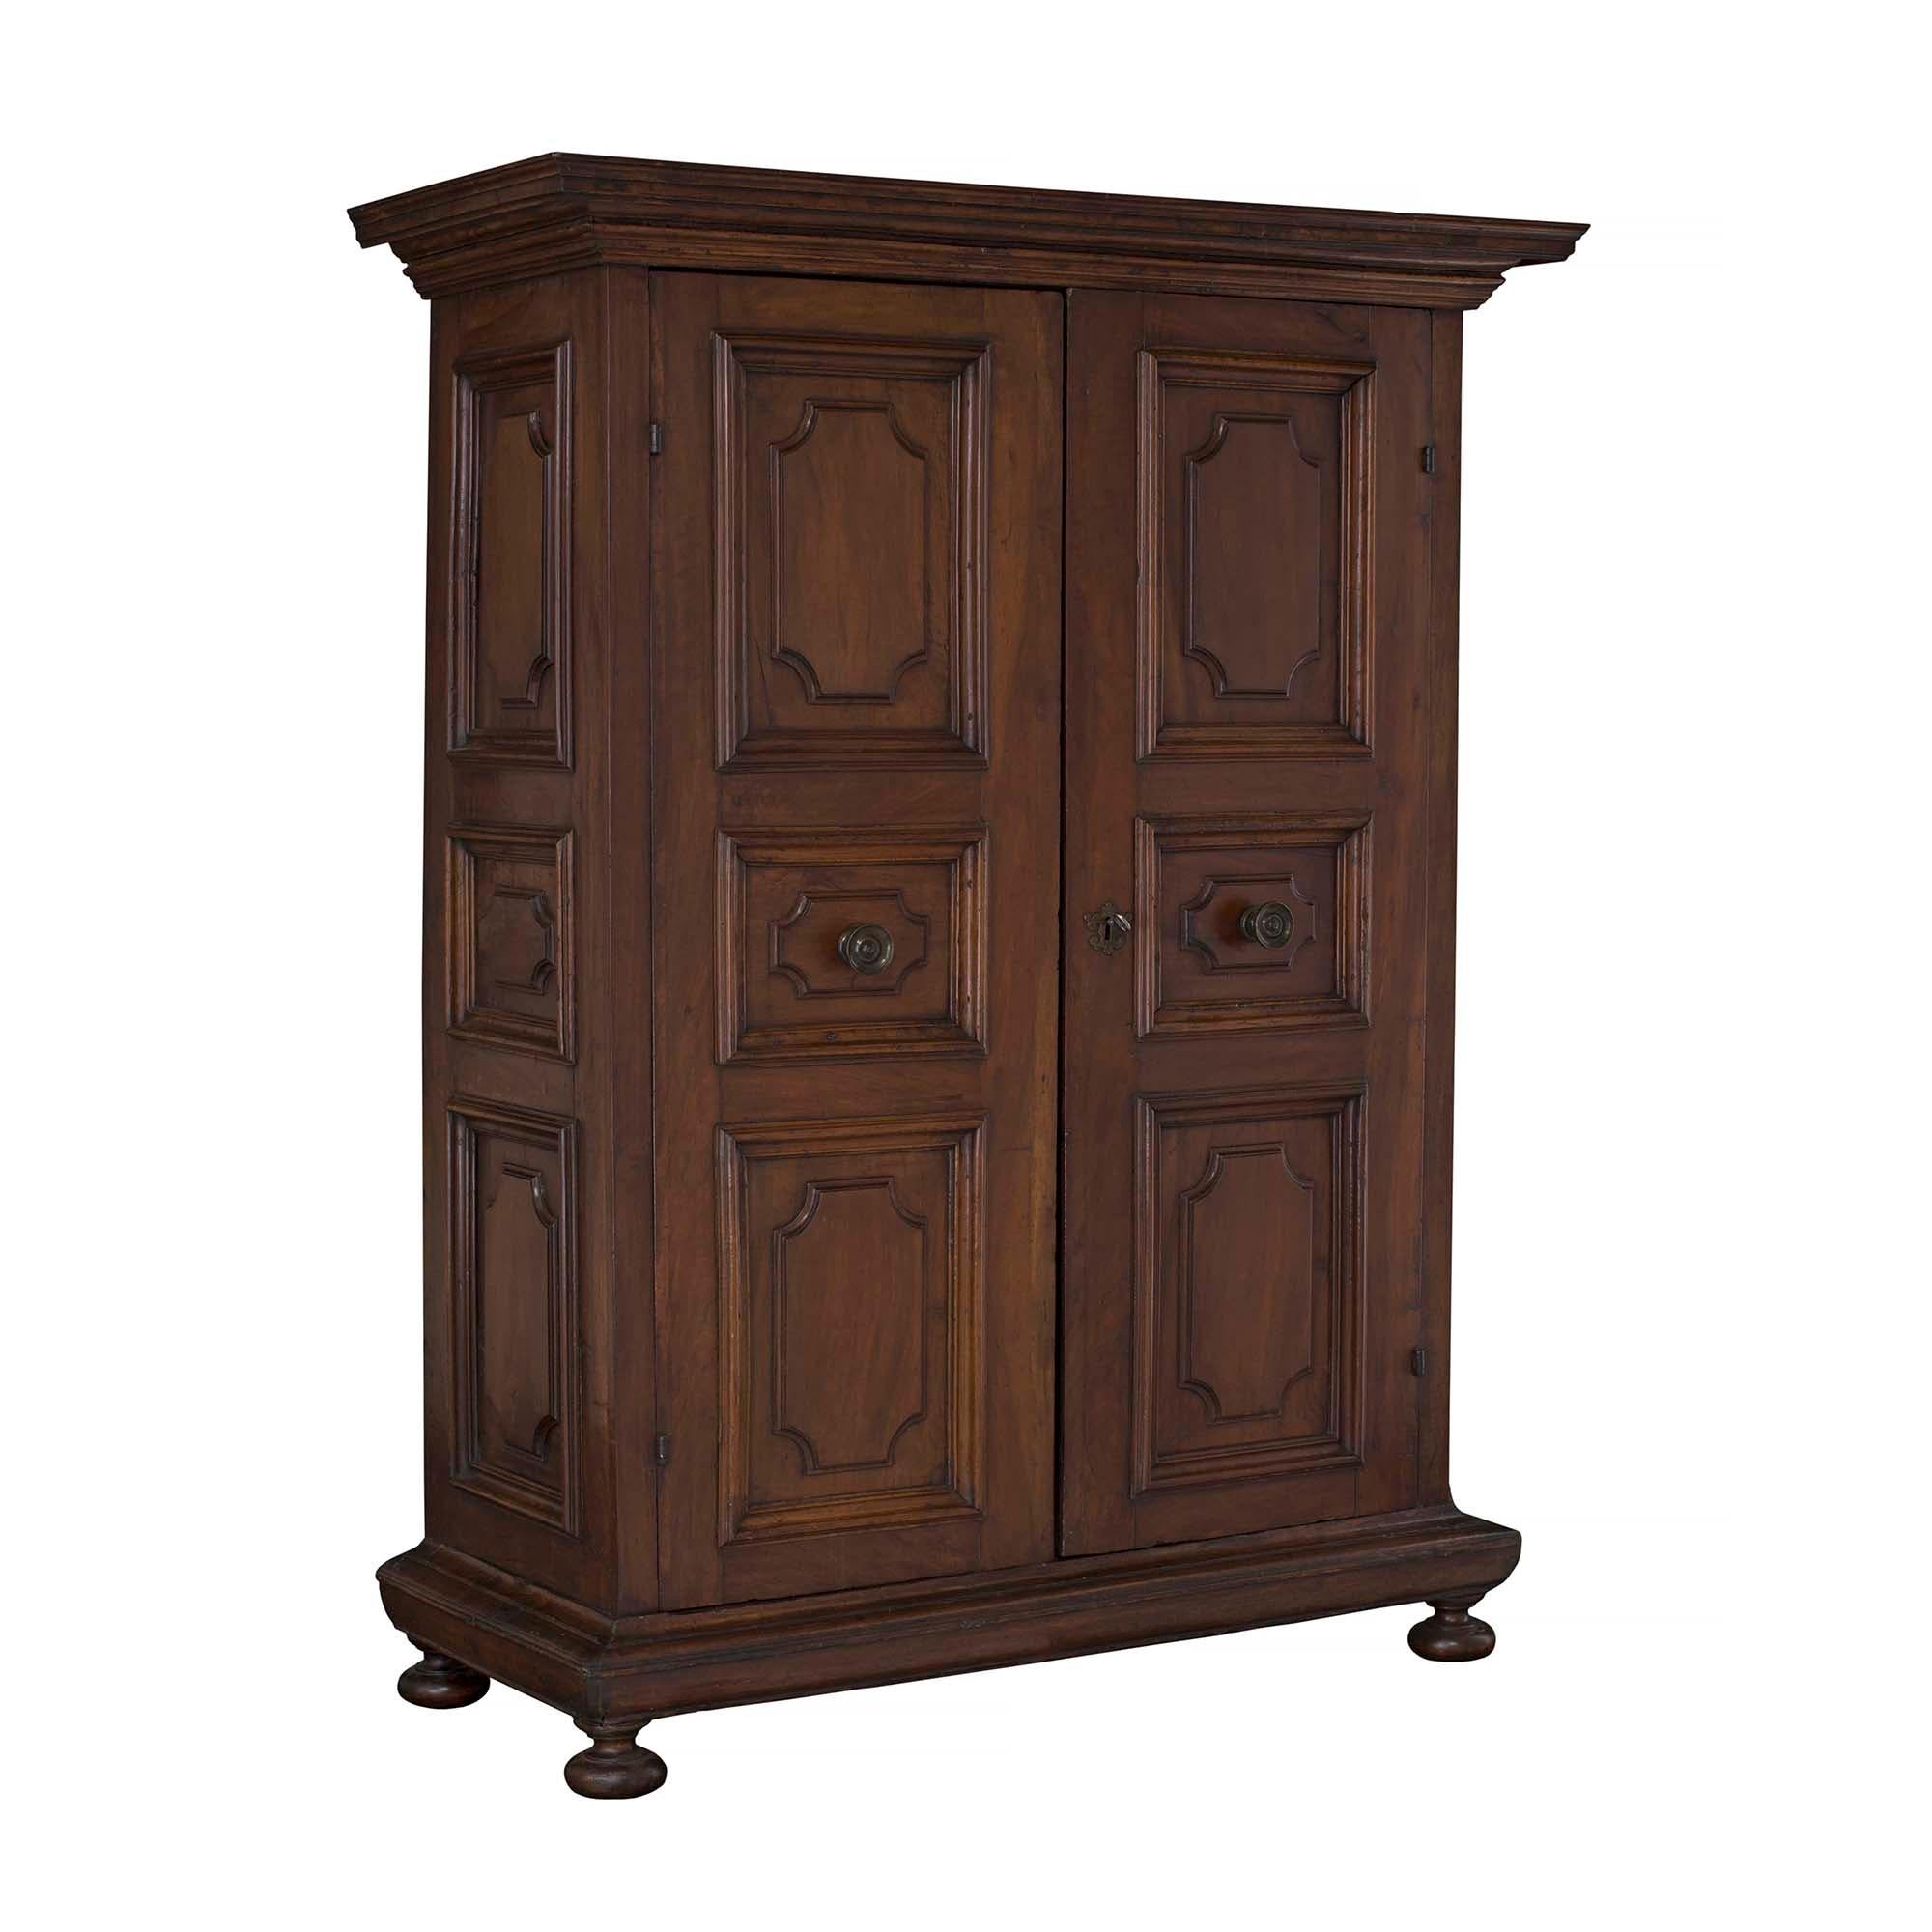 A handsome Italian 18th-century solid walnut and iron Tuscan armoire. The armoire is raised by bun feet below the straight mottled frieze. At the center are two beautiful doors with carved recessed panels and a central circular iron pull. The doors